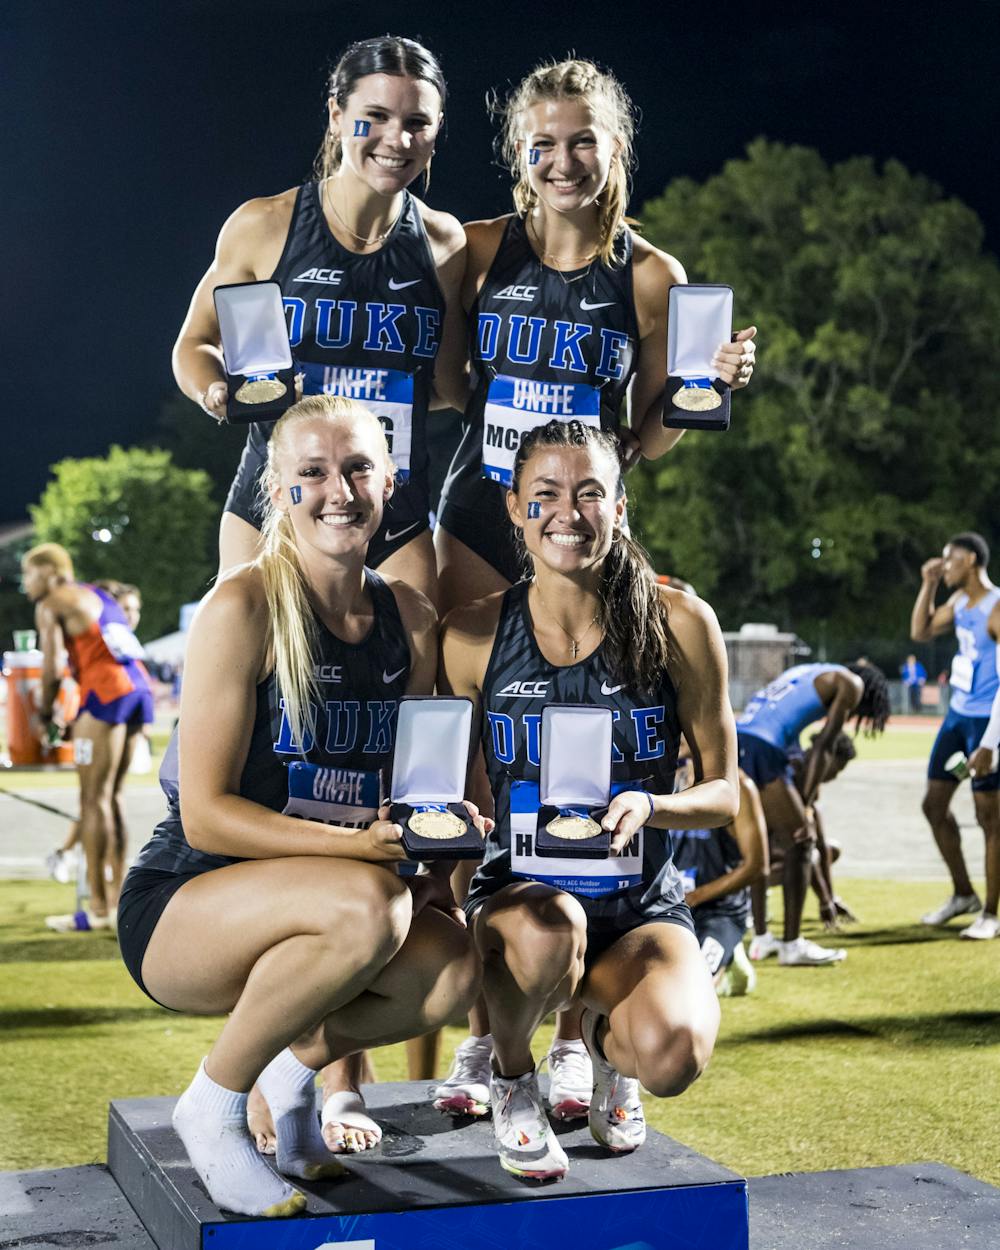 Duke placed second on the women's side after taking gold in the 4x400m relay.